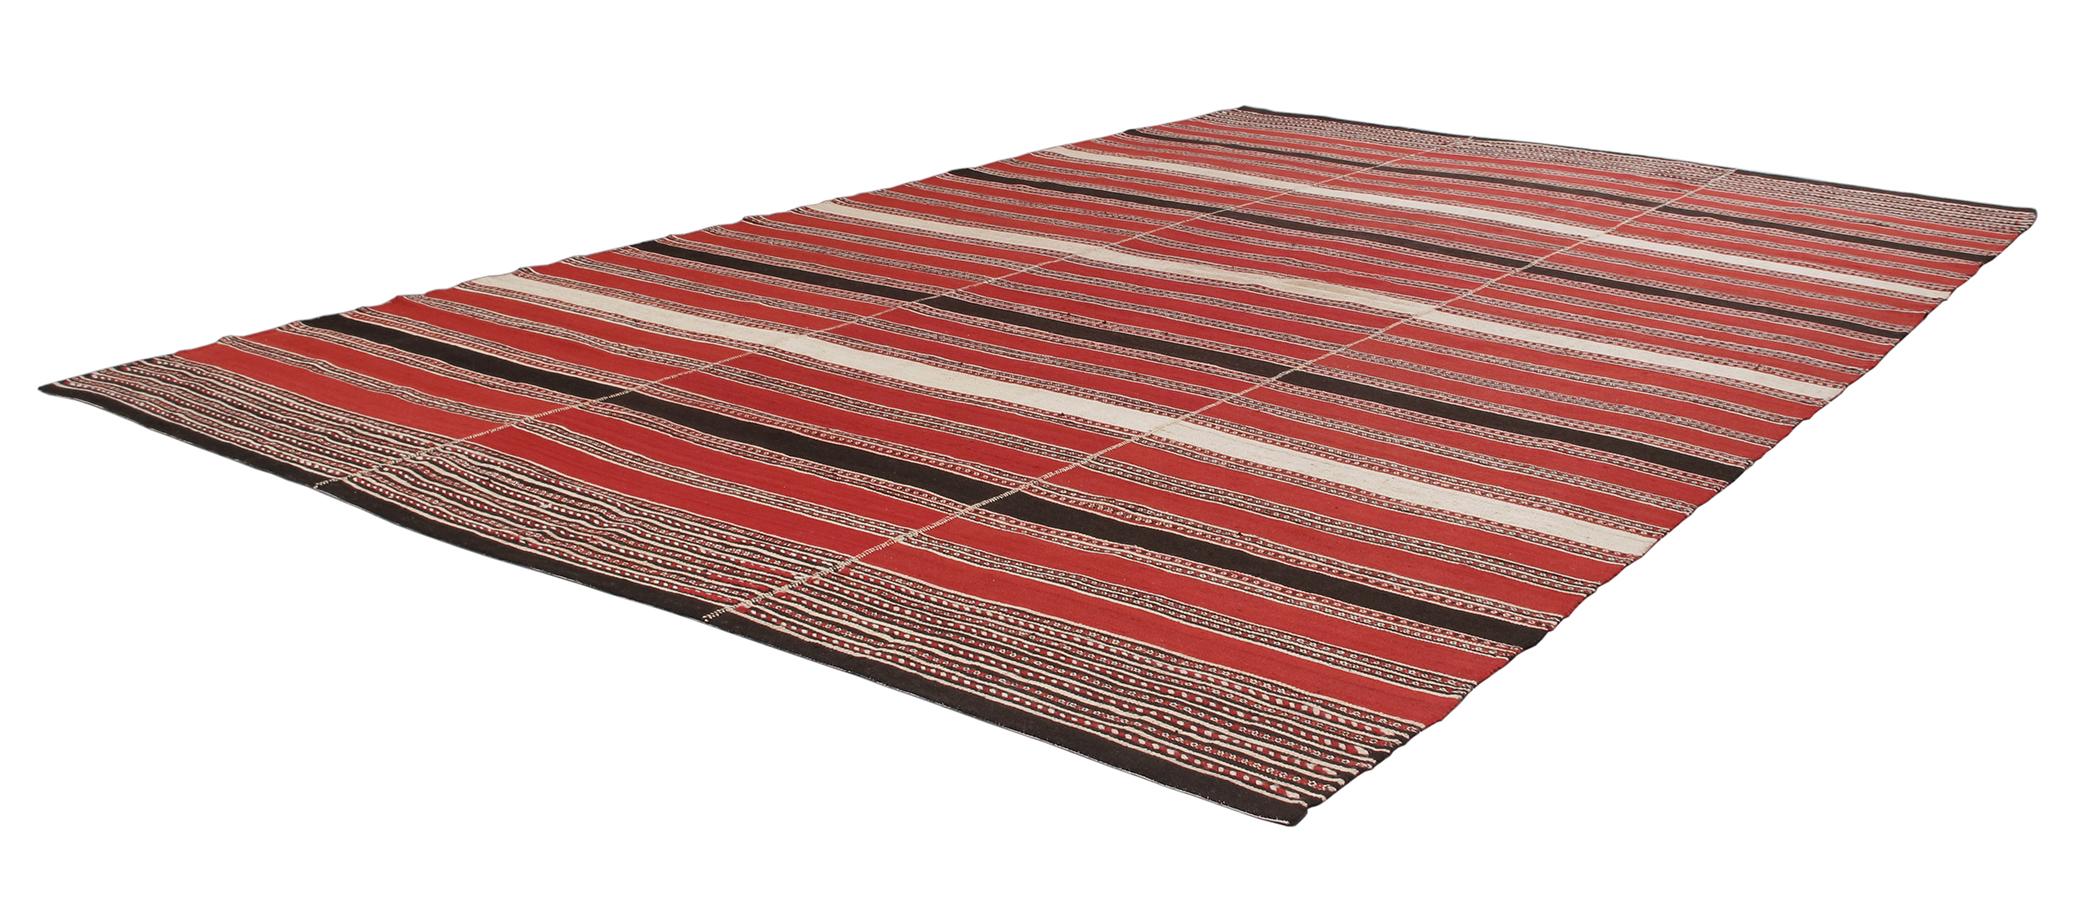 Hand-Woven Vintage Tribal Mid-Century Modern Persian Flat-Weave Rug For Sale